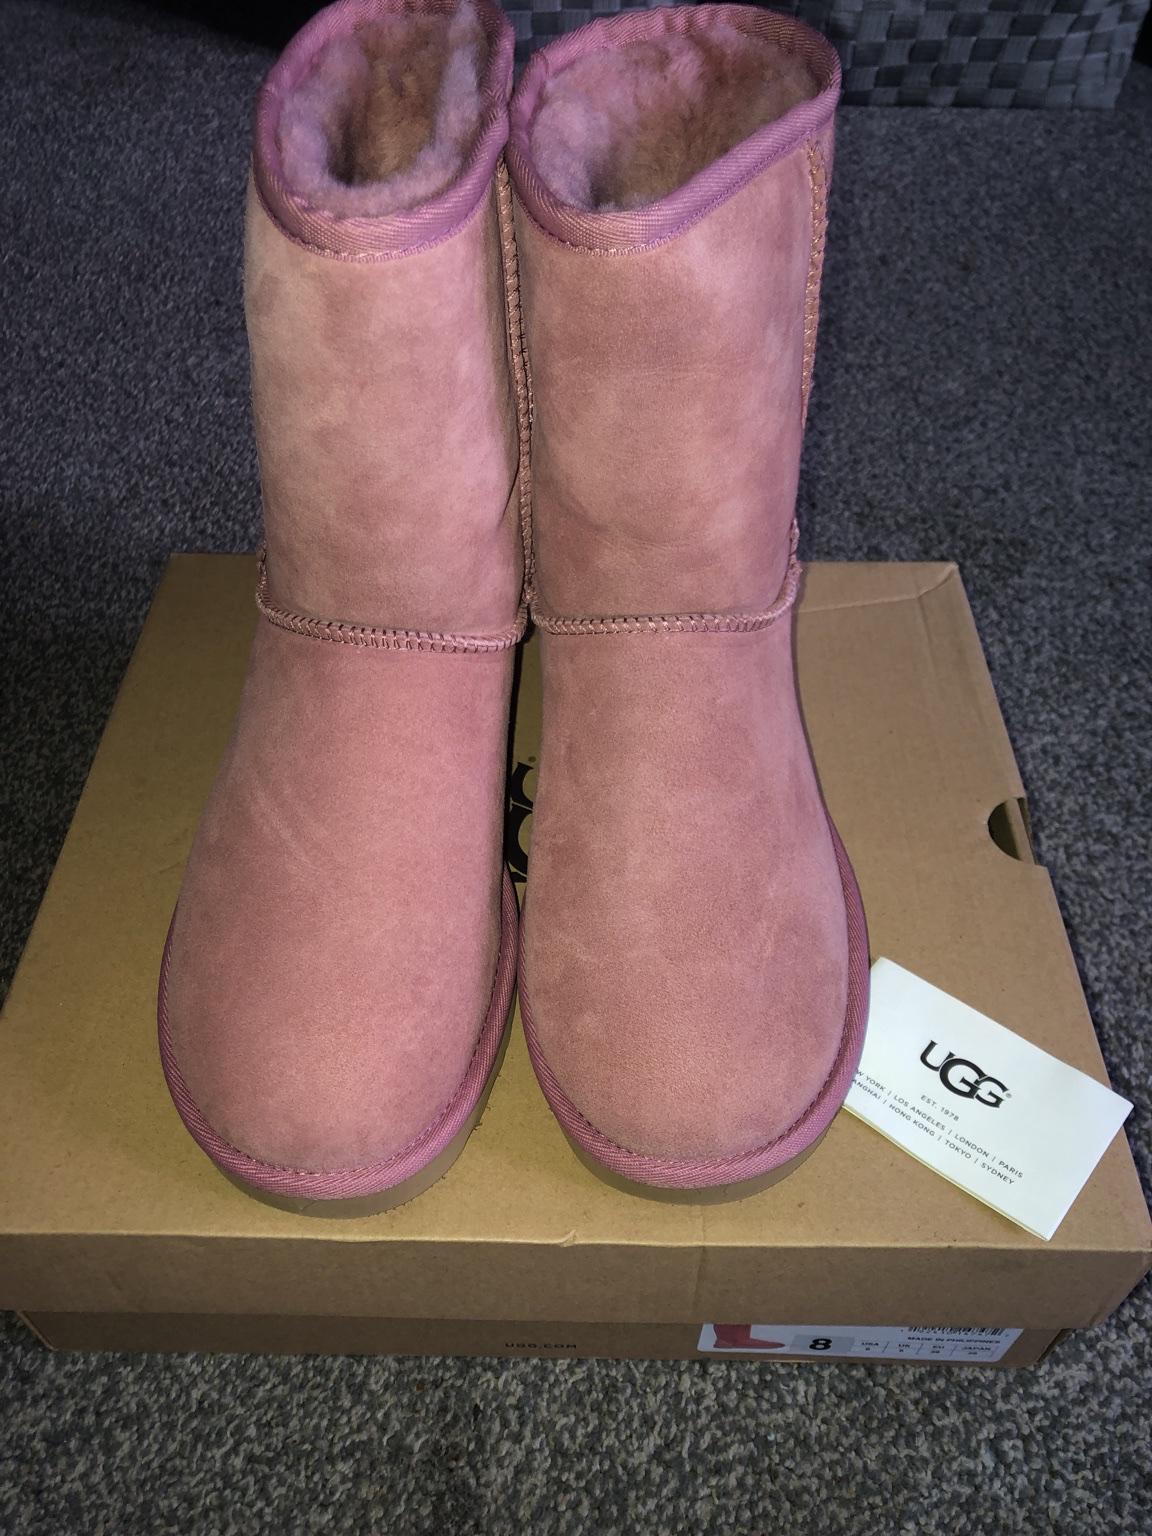 Ladies genuine ugg boots size 6 in 